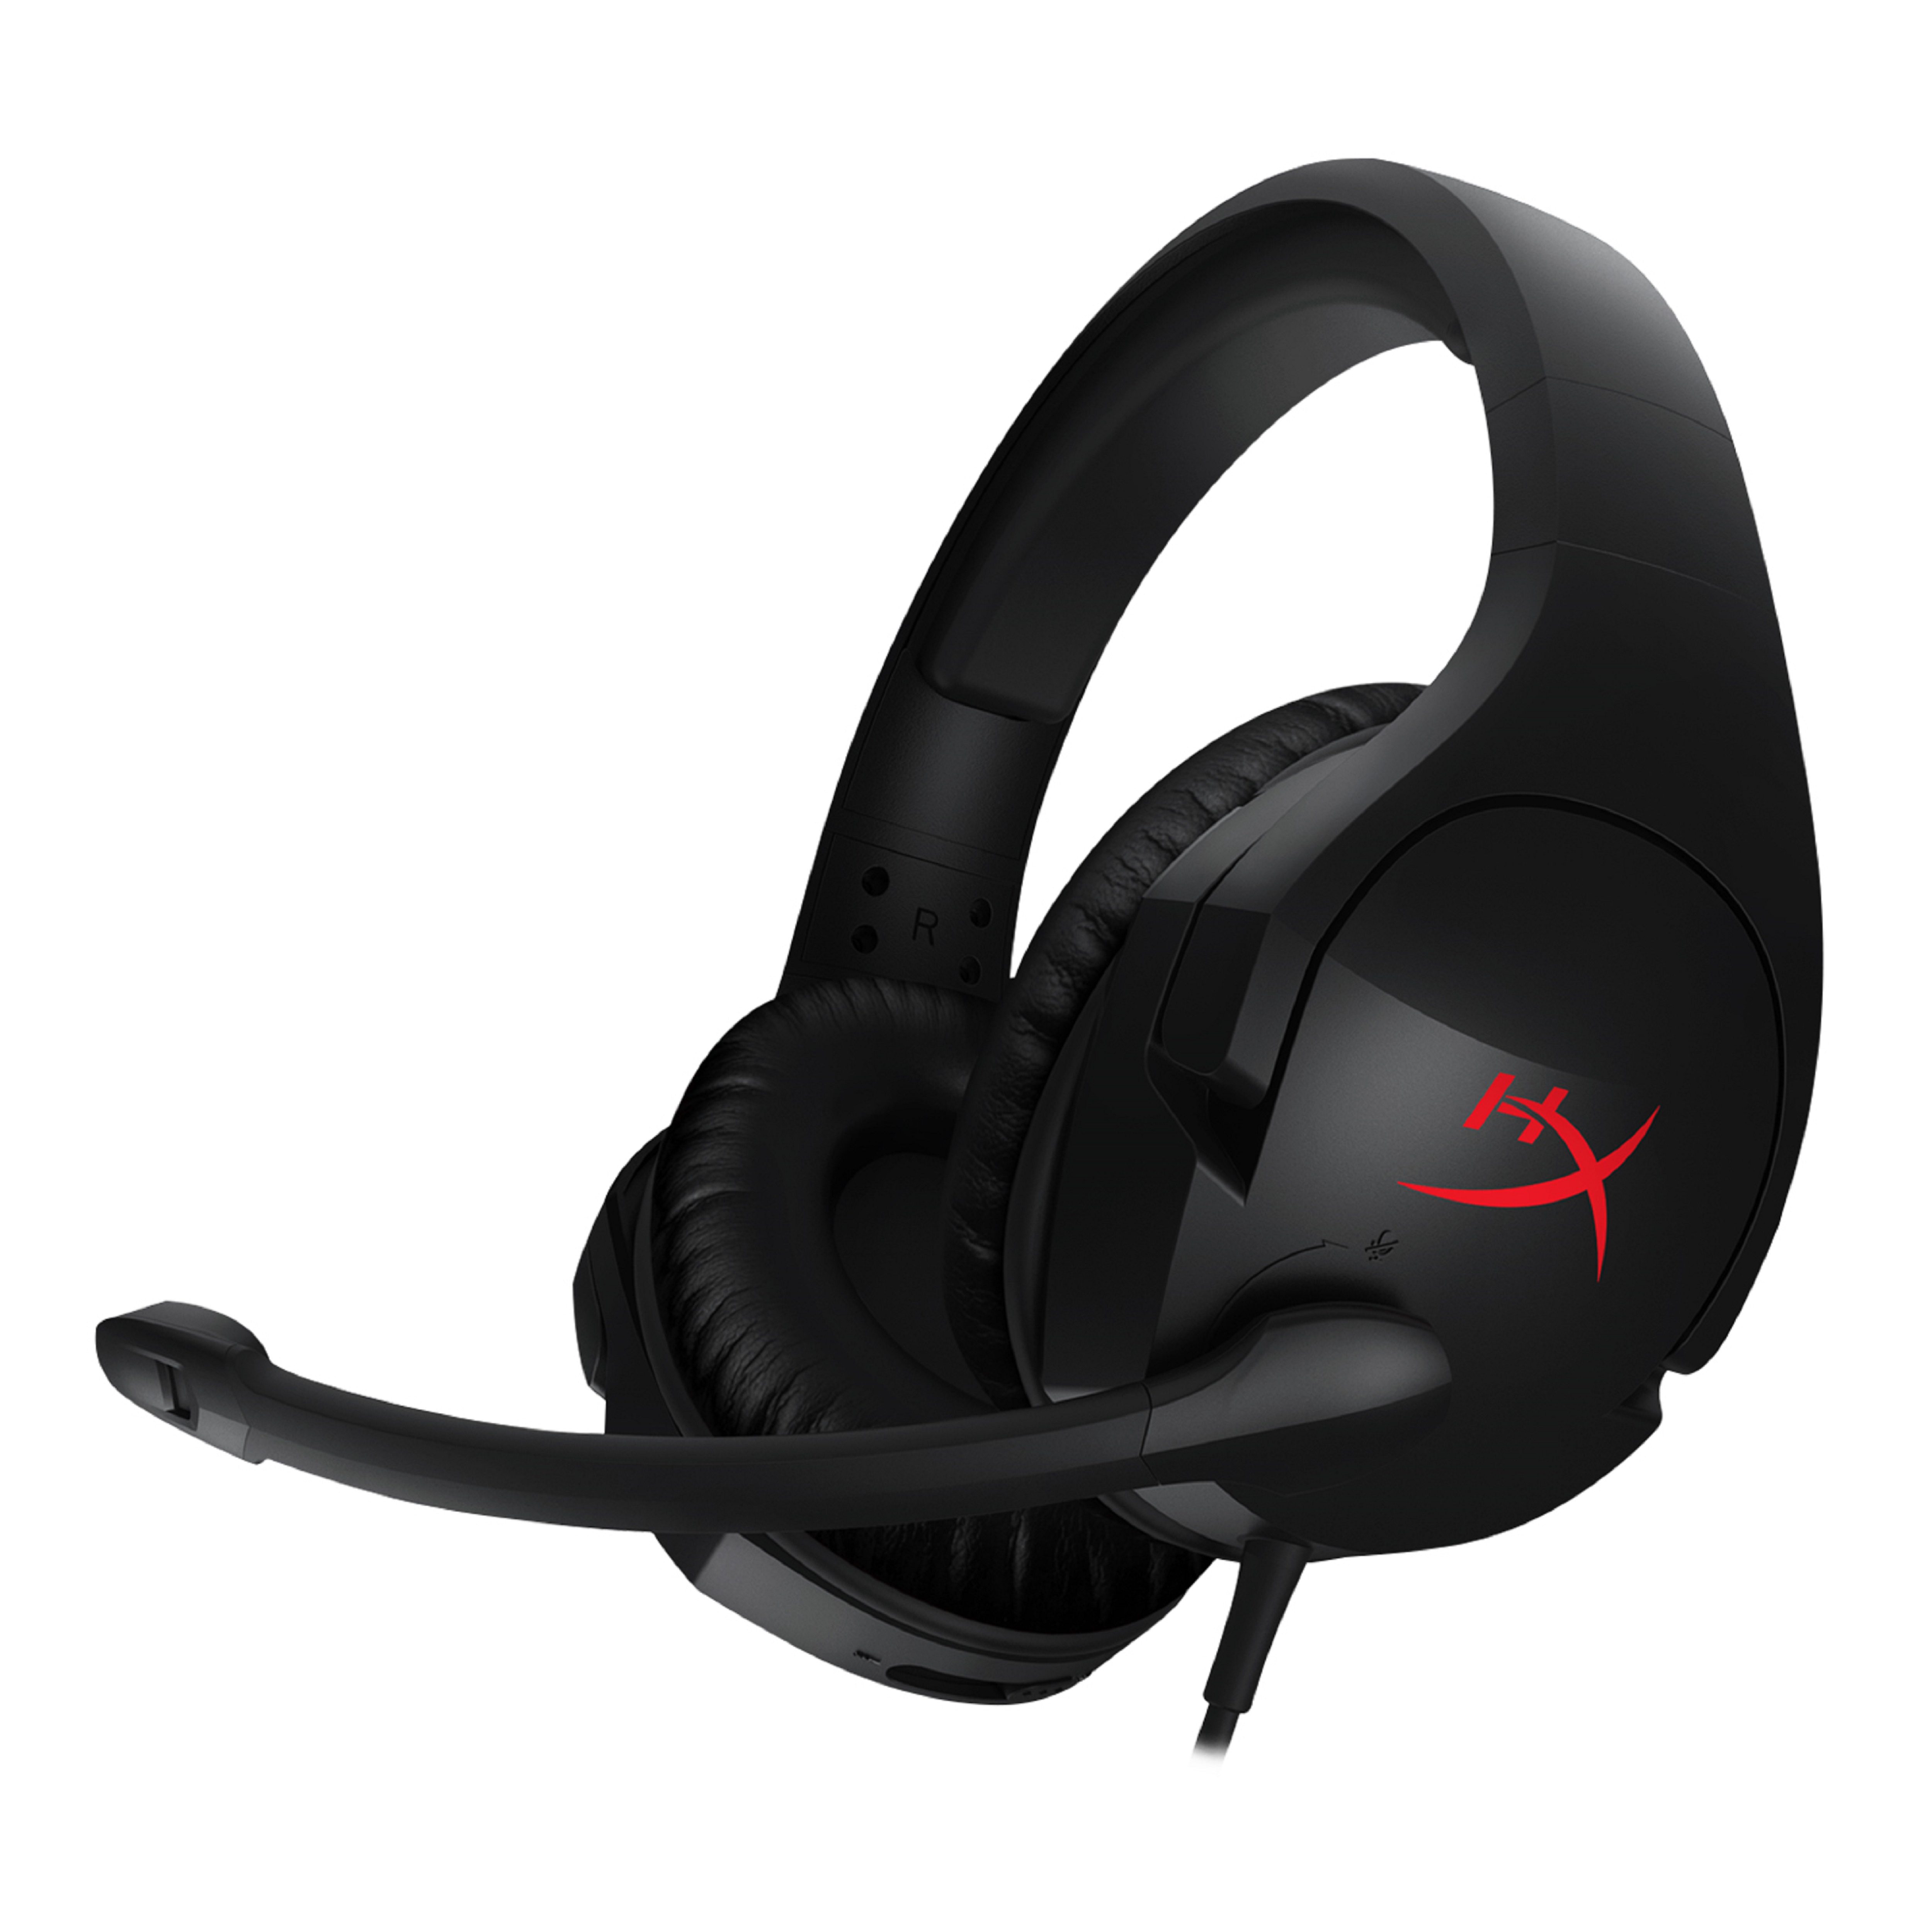 Valentine's Day Tech Gift Options for HIM from HyperX and Kingston